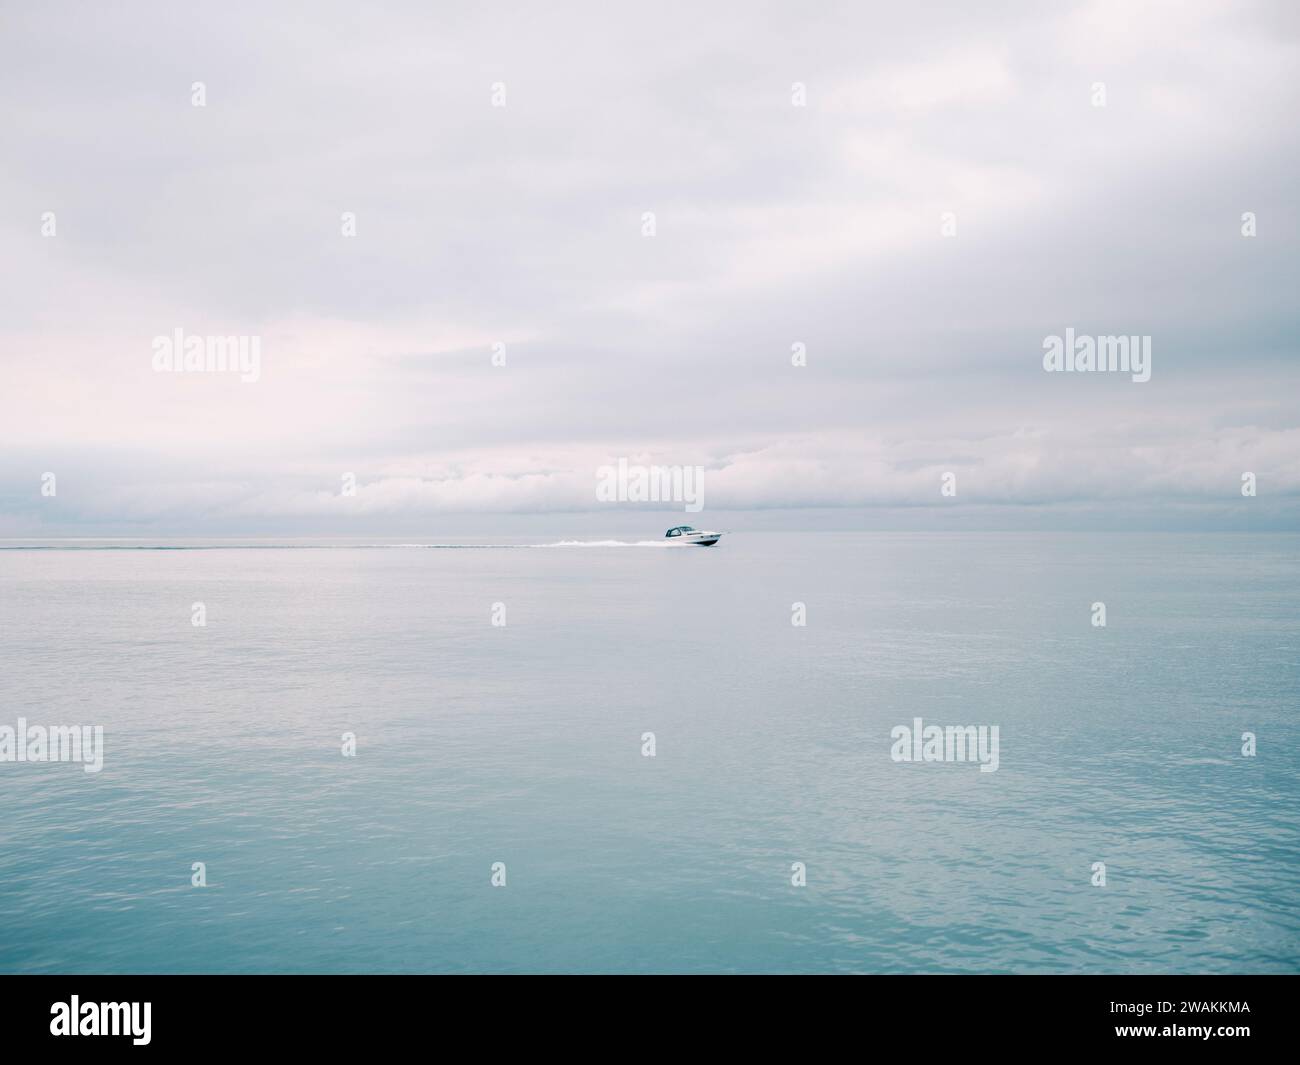 A small vessel sailing through choppy waters on a cloudy day, with no other vessels in sight. Stock Photo